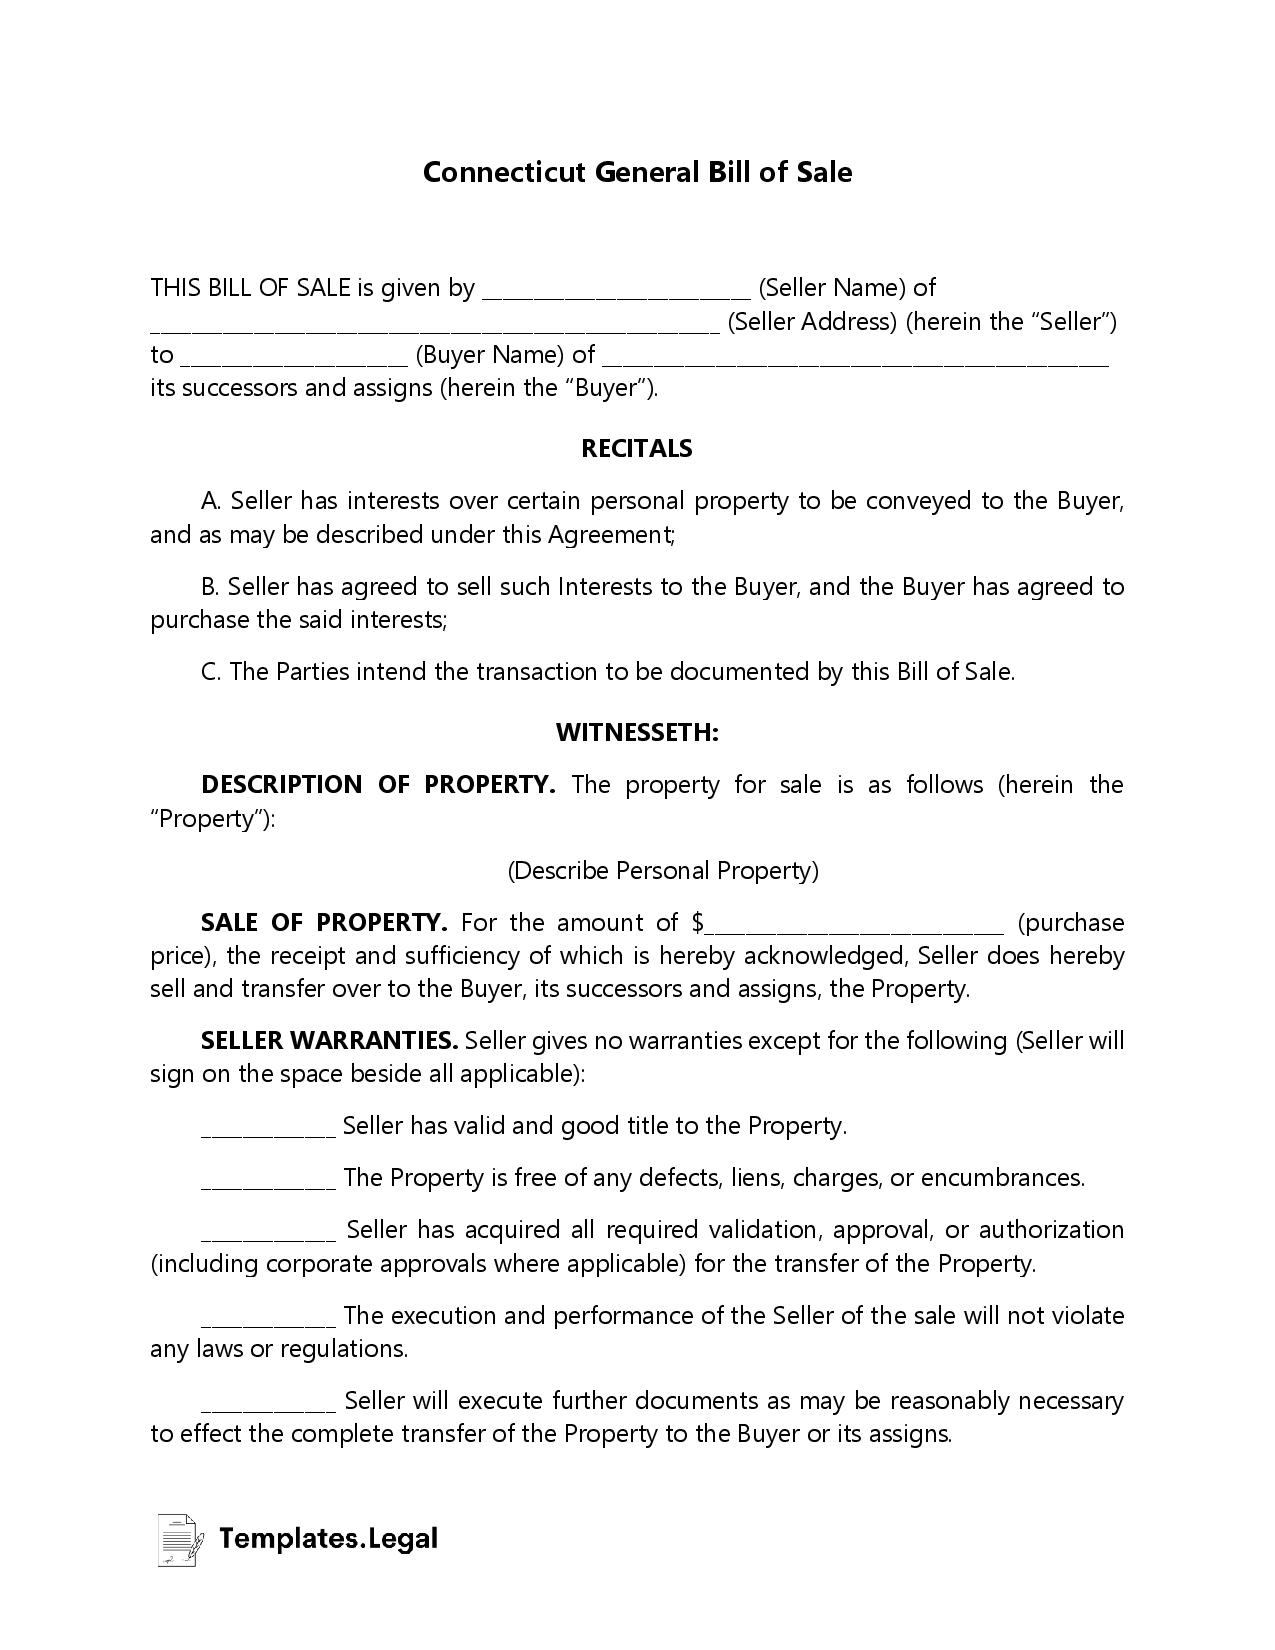 Connecticut General Bill of Sale - Templates.Legal